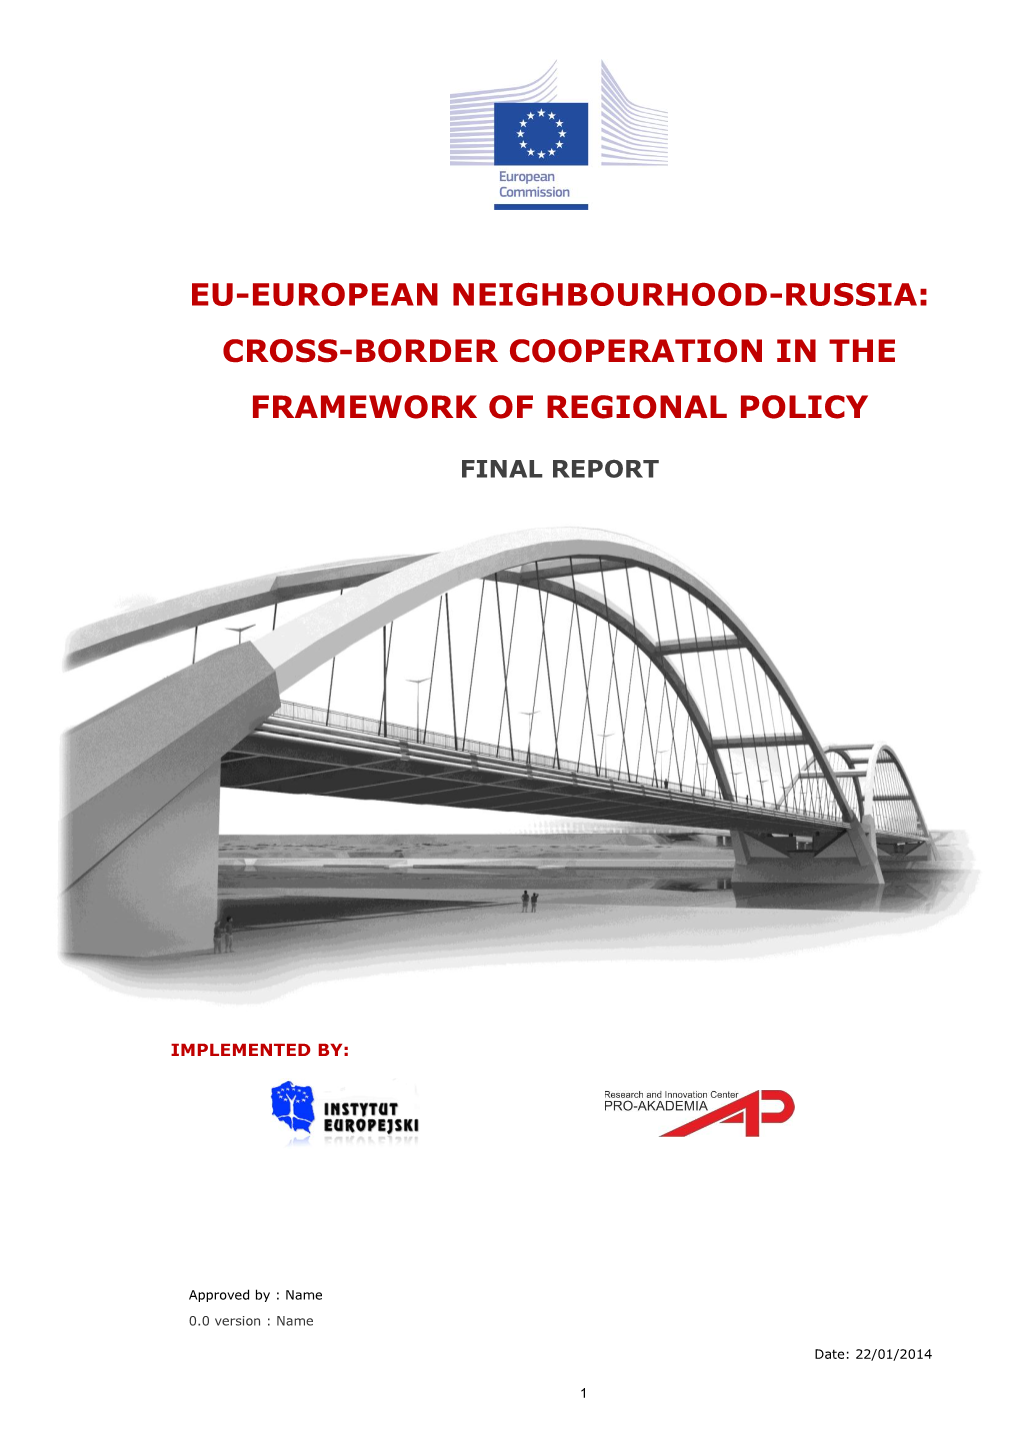 Cross-Border Cooperation in the Framework of Regional Policy